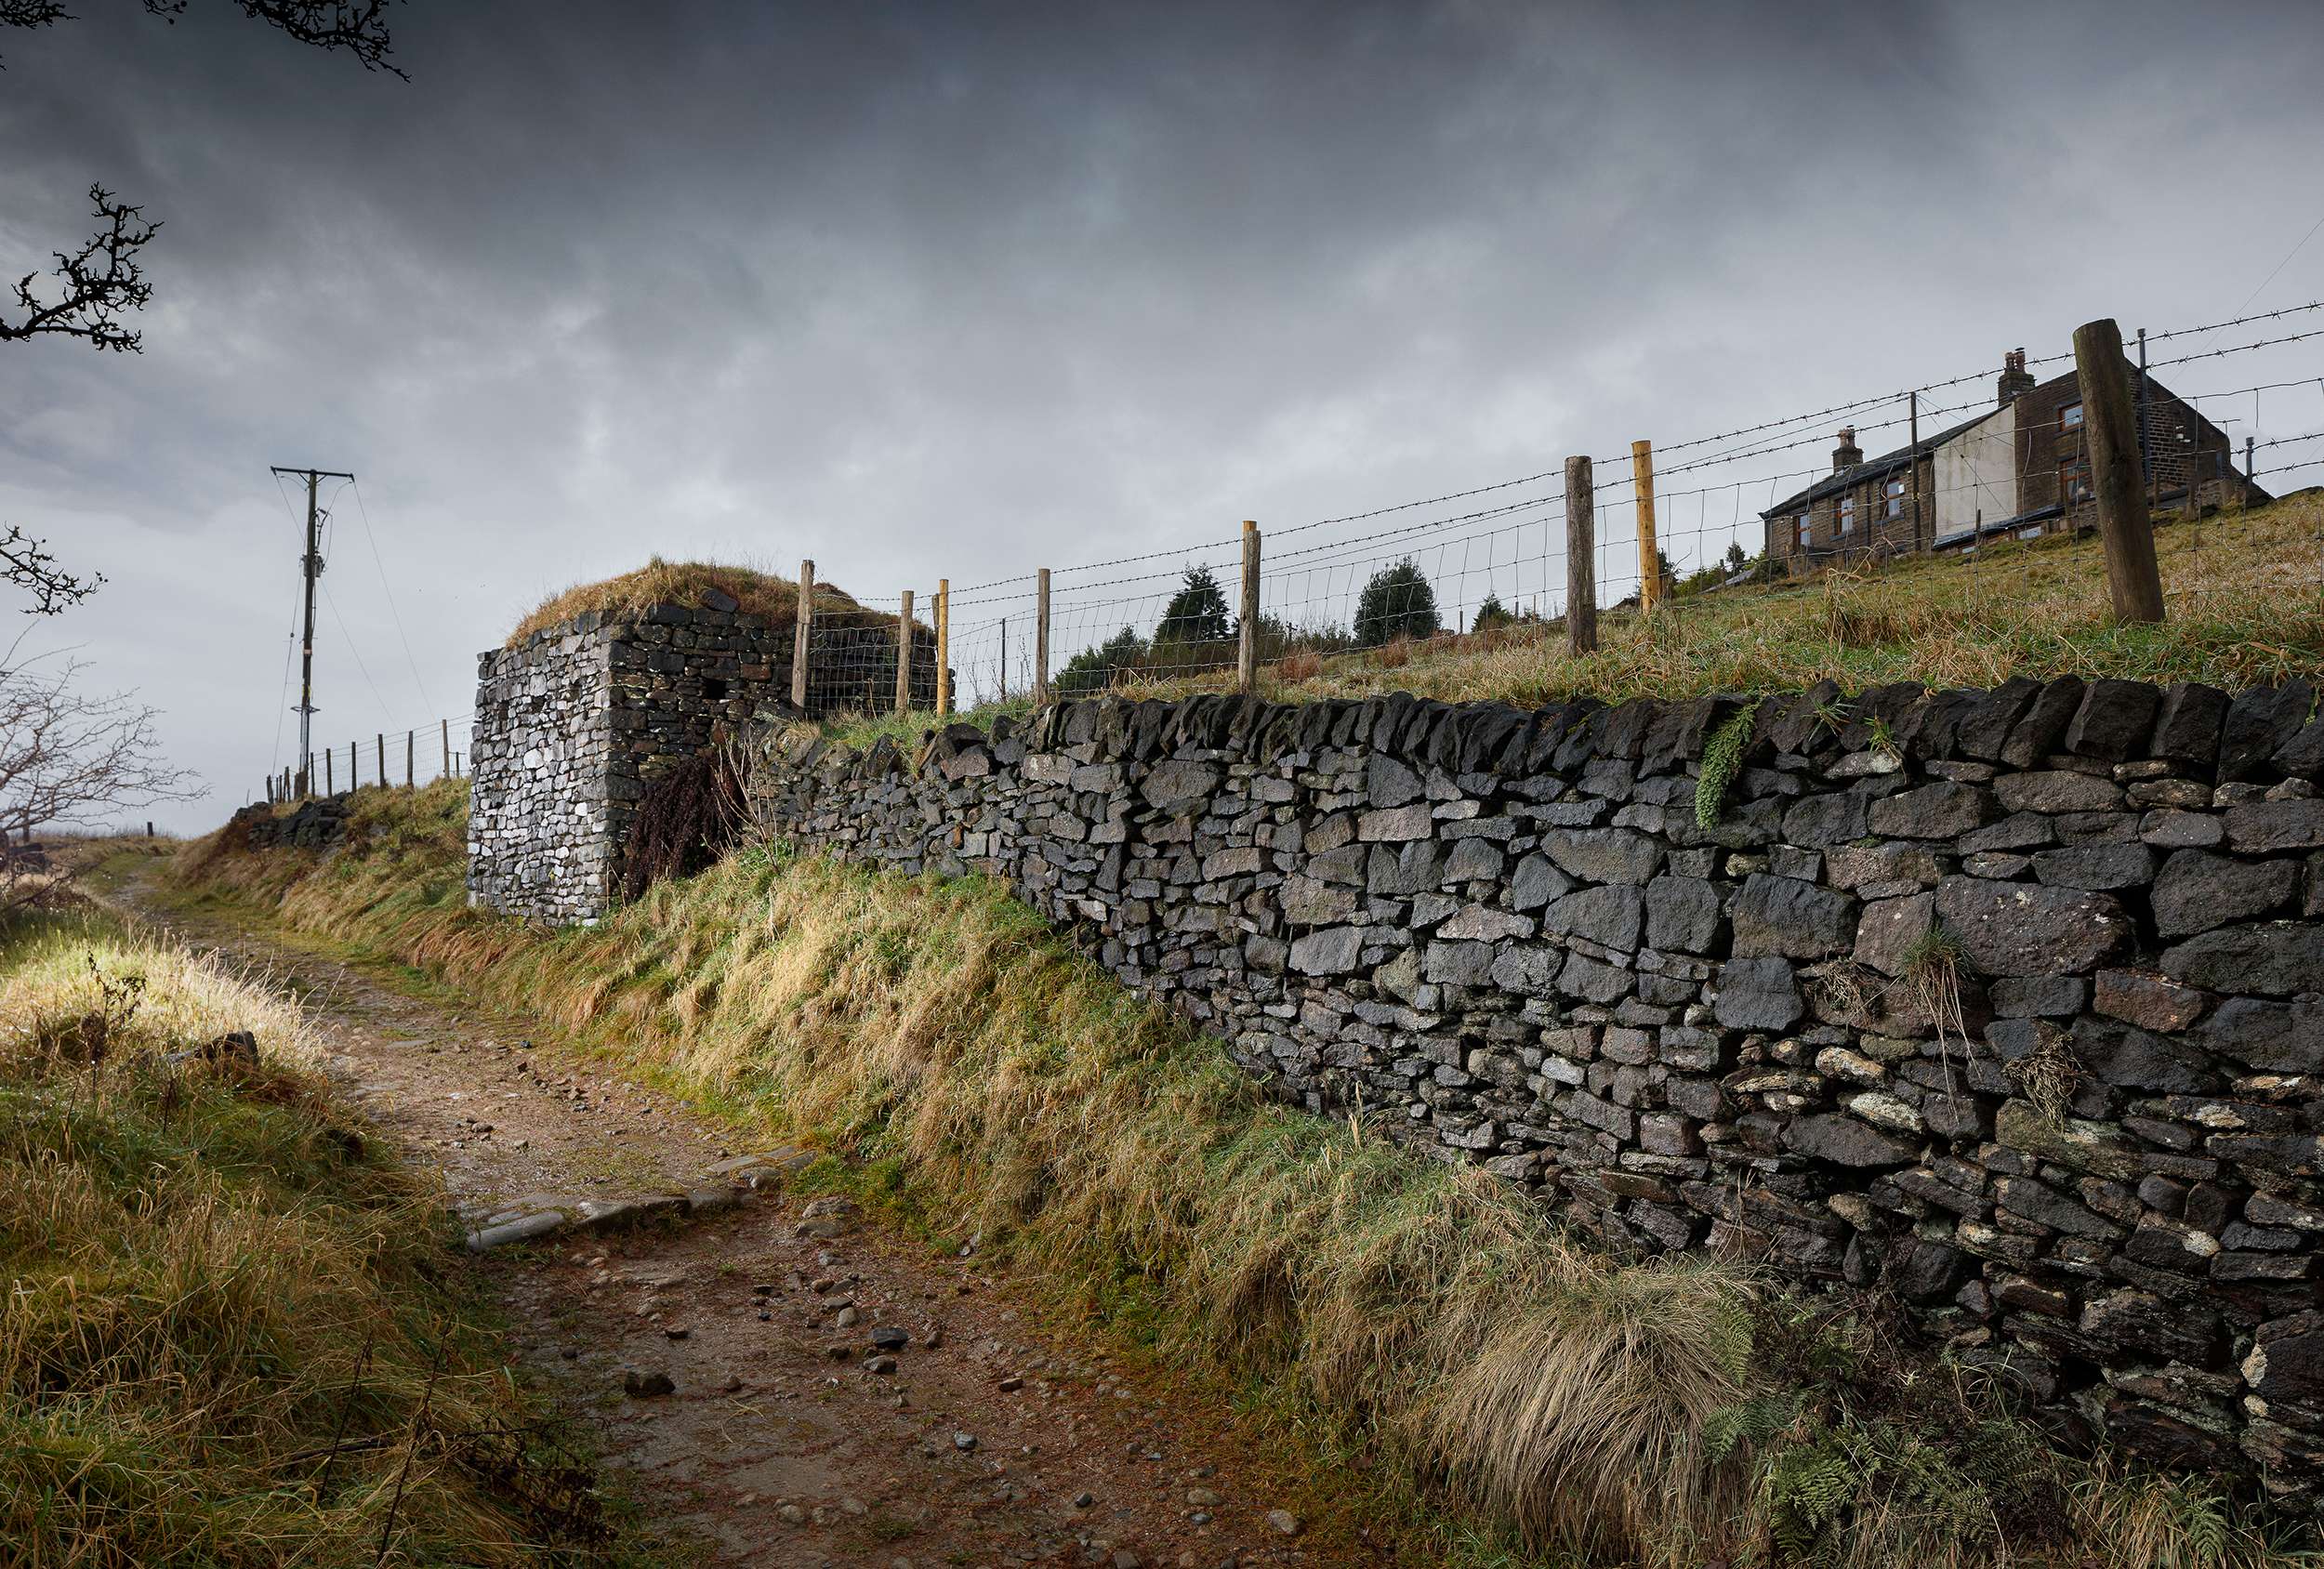 Dry stone wall and pillbox exterior walls and turfed roof giving the appearance of an agricultural vernacular building, camouflaging its real purpose.